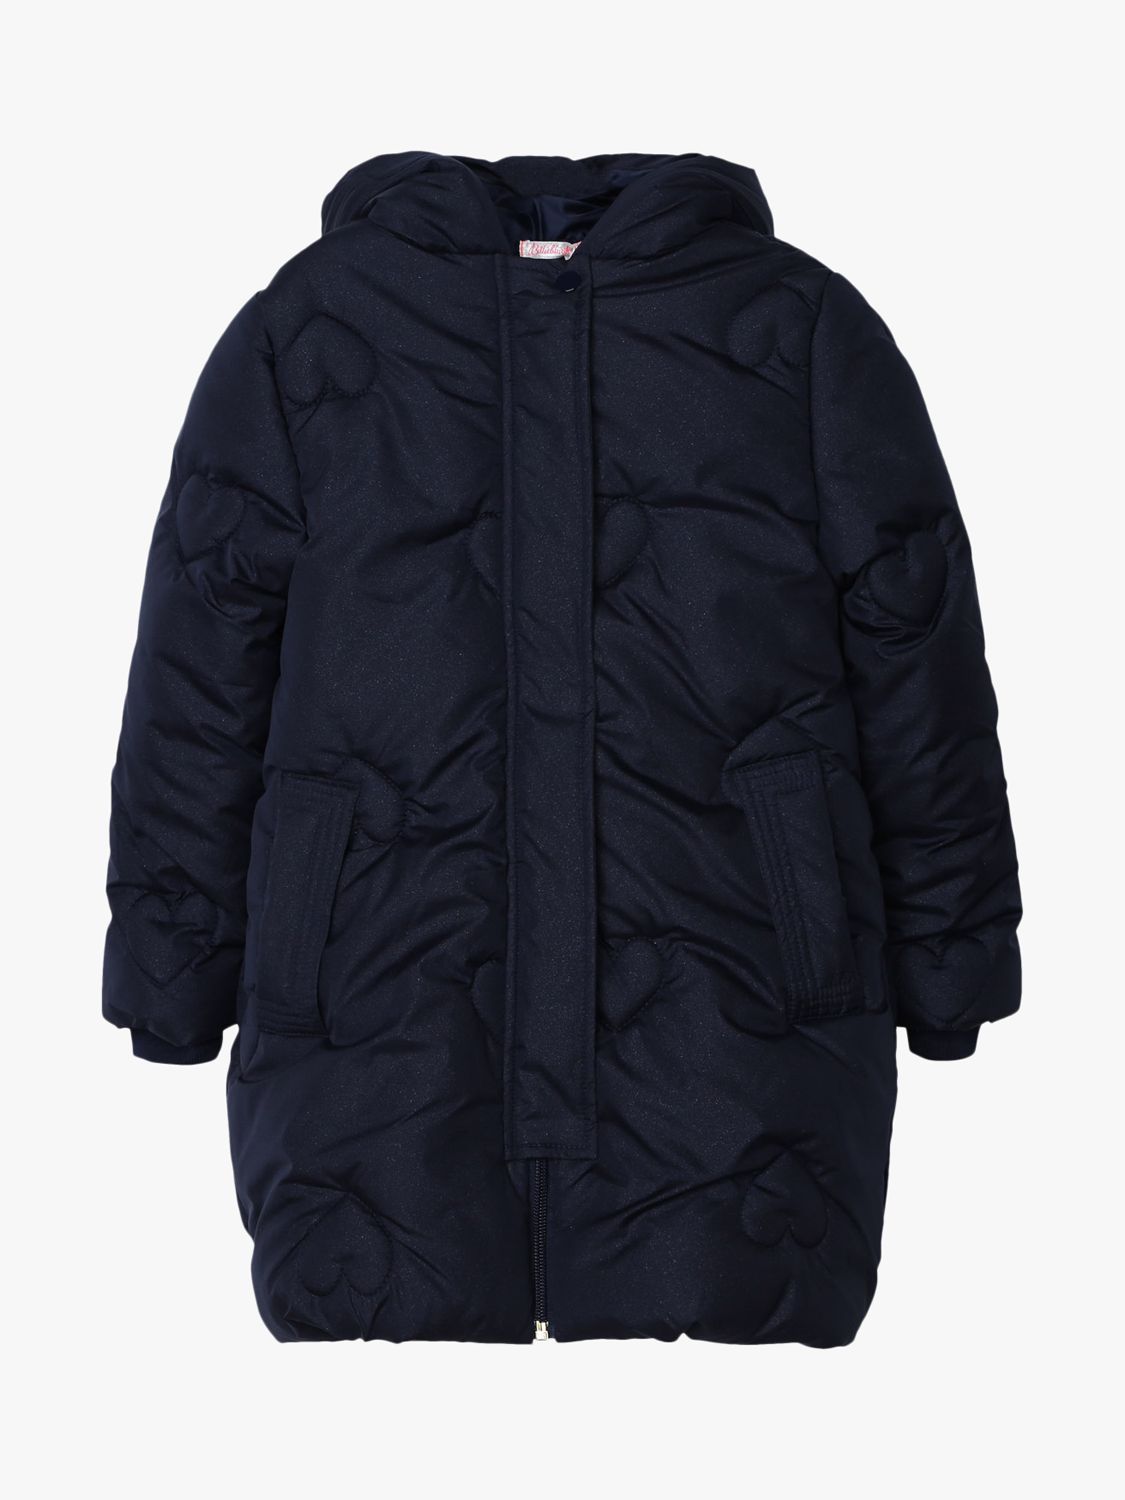 Image of Billlieblush Girls Heart Embroidered Long Puffer Jacket Navy